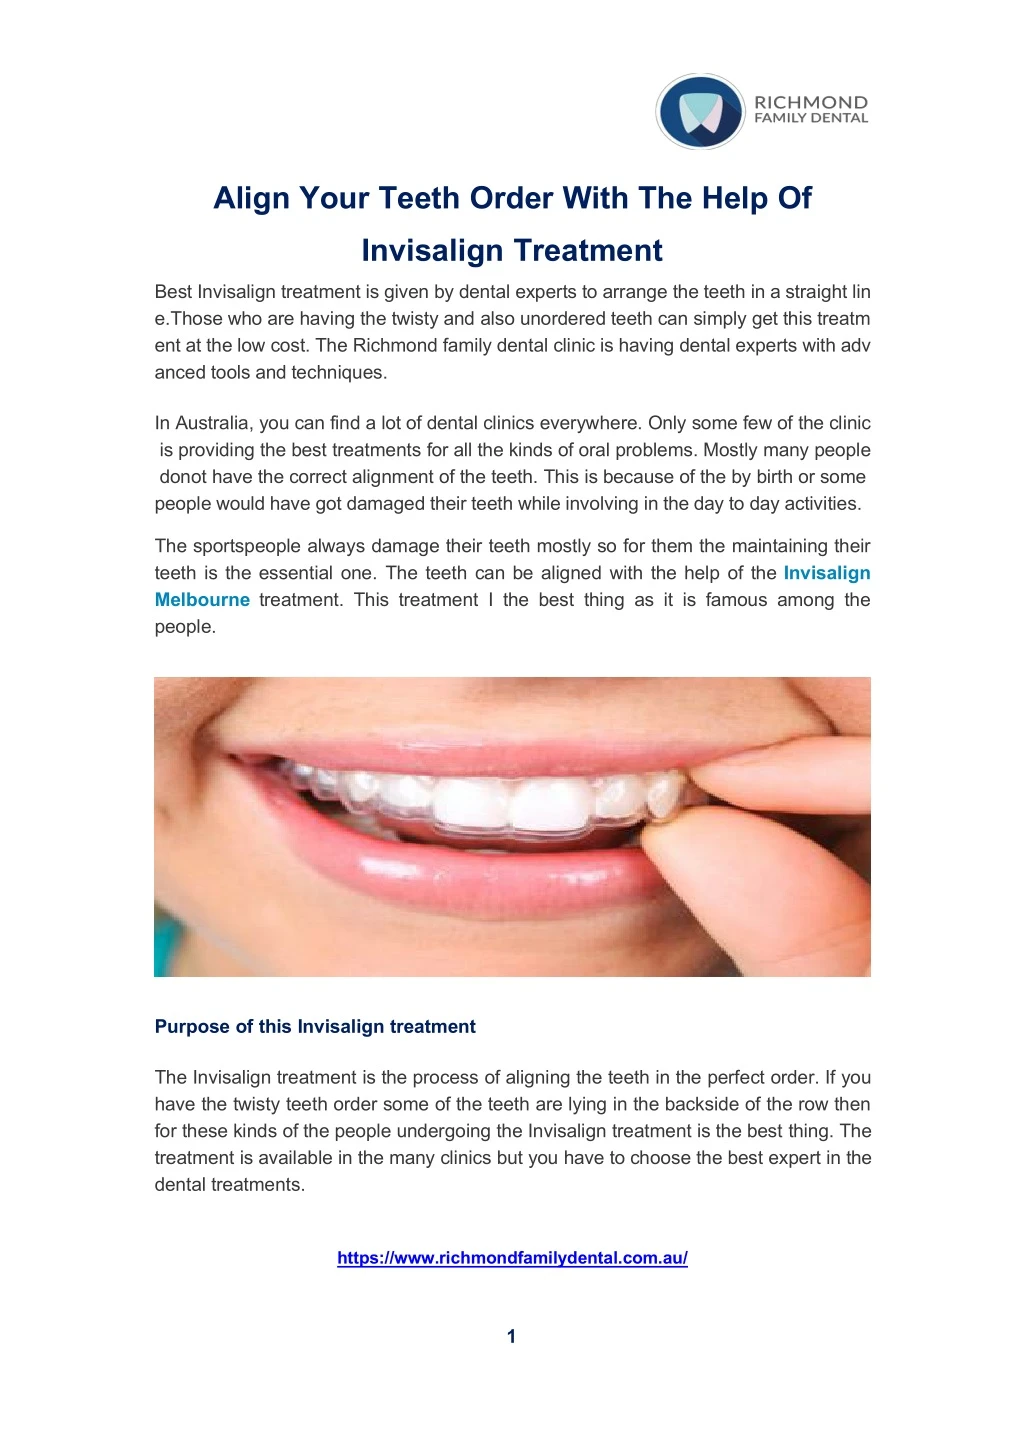 align your teeth order with the help of